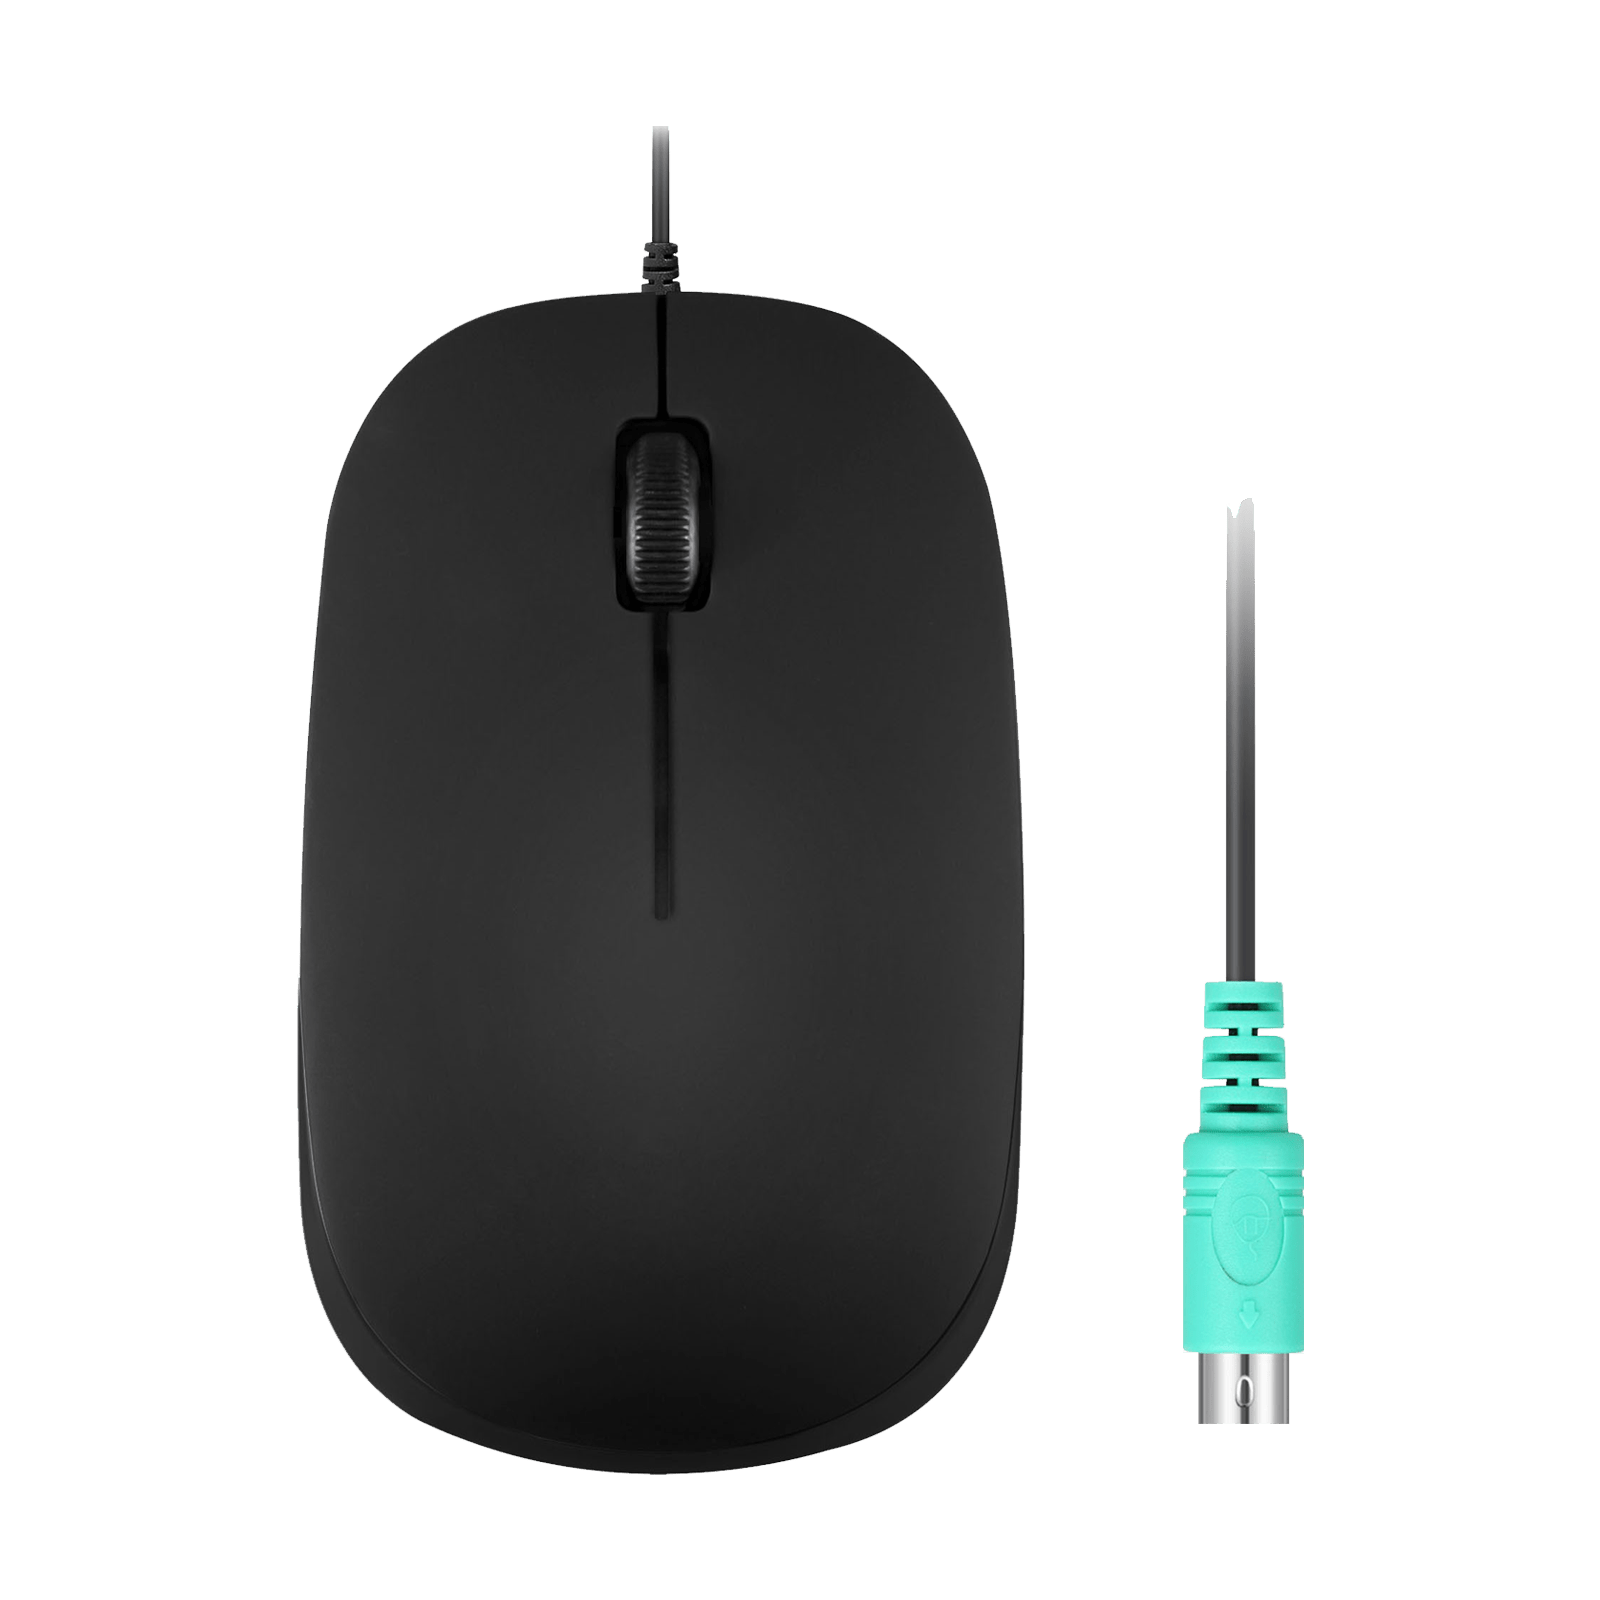 PERIMICE-201 P - Wired Mouse ONLY for PS/2 Port - Perixx Europe